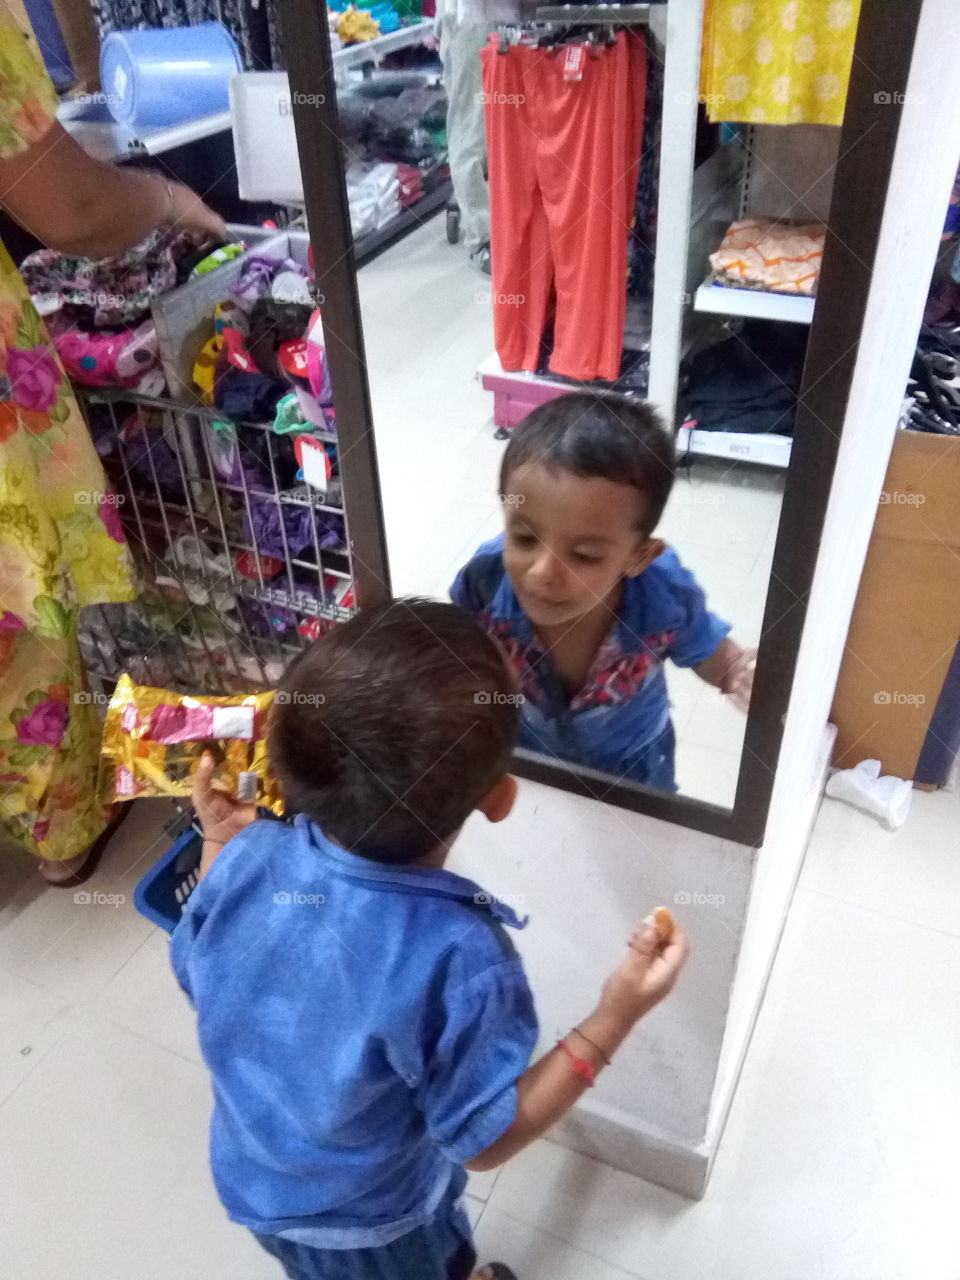 Little boy playing with mirror